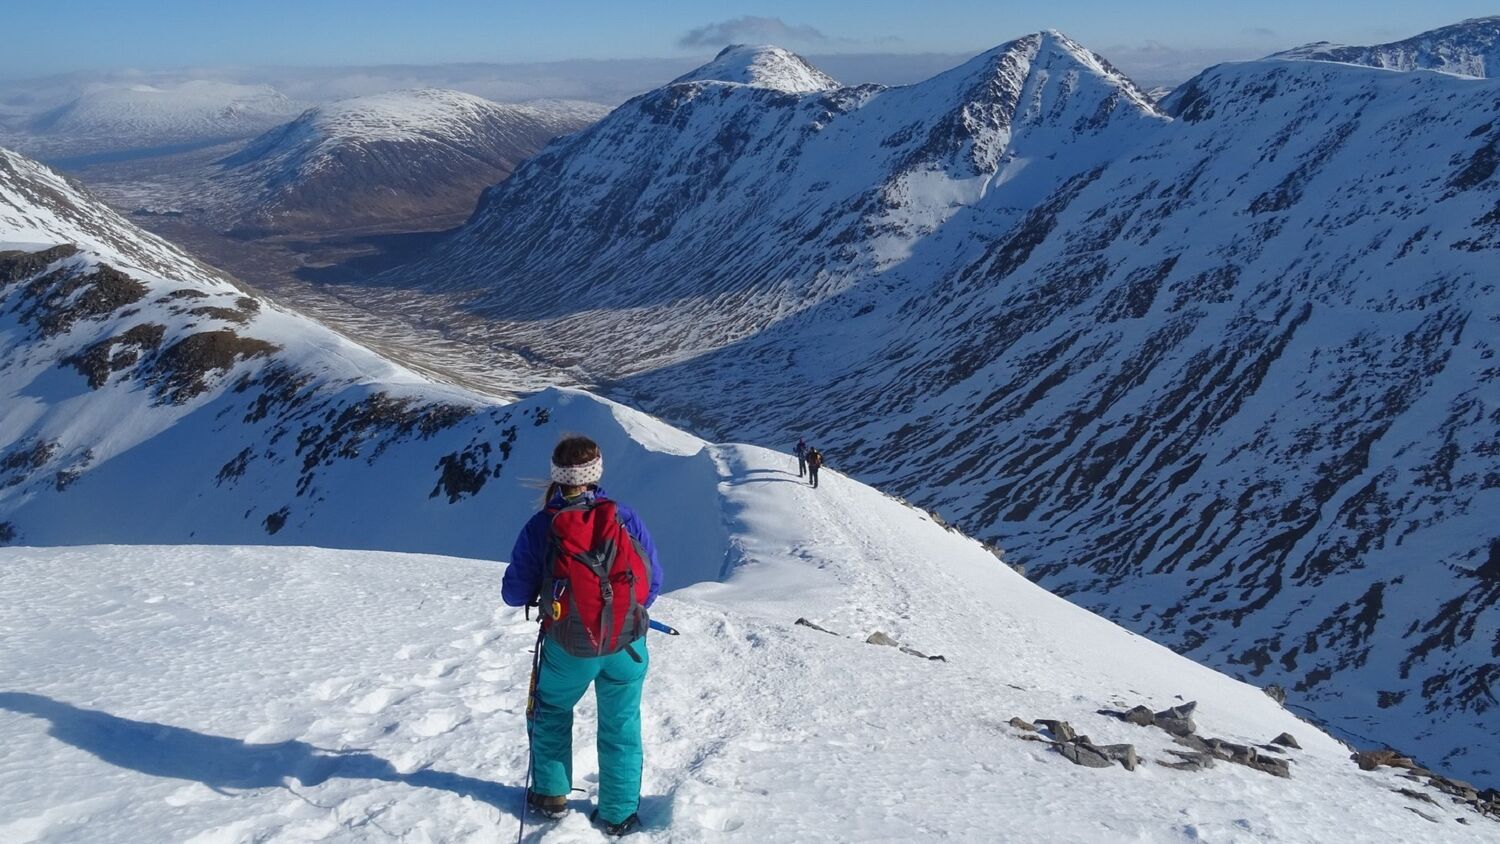 A woman dressed in full winter gear stands almost at the summit of a snow-covered mountain, looking down towards a ridge path, with the glen far below. The sky is bright blue and the snow is glistening.